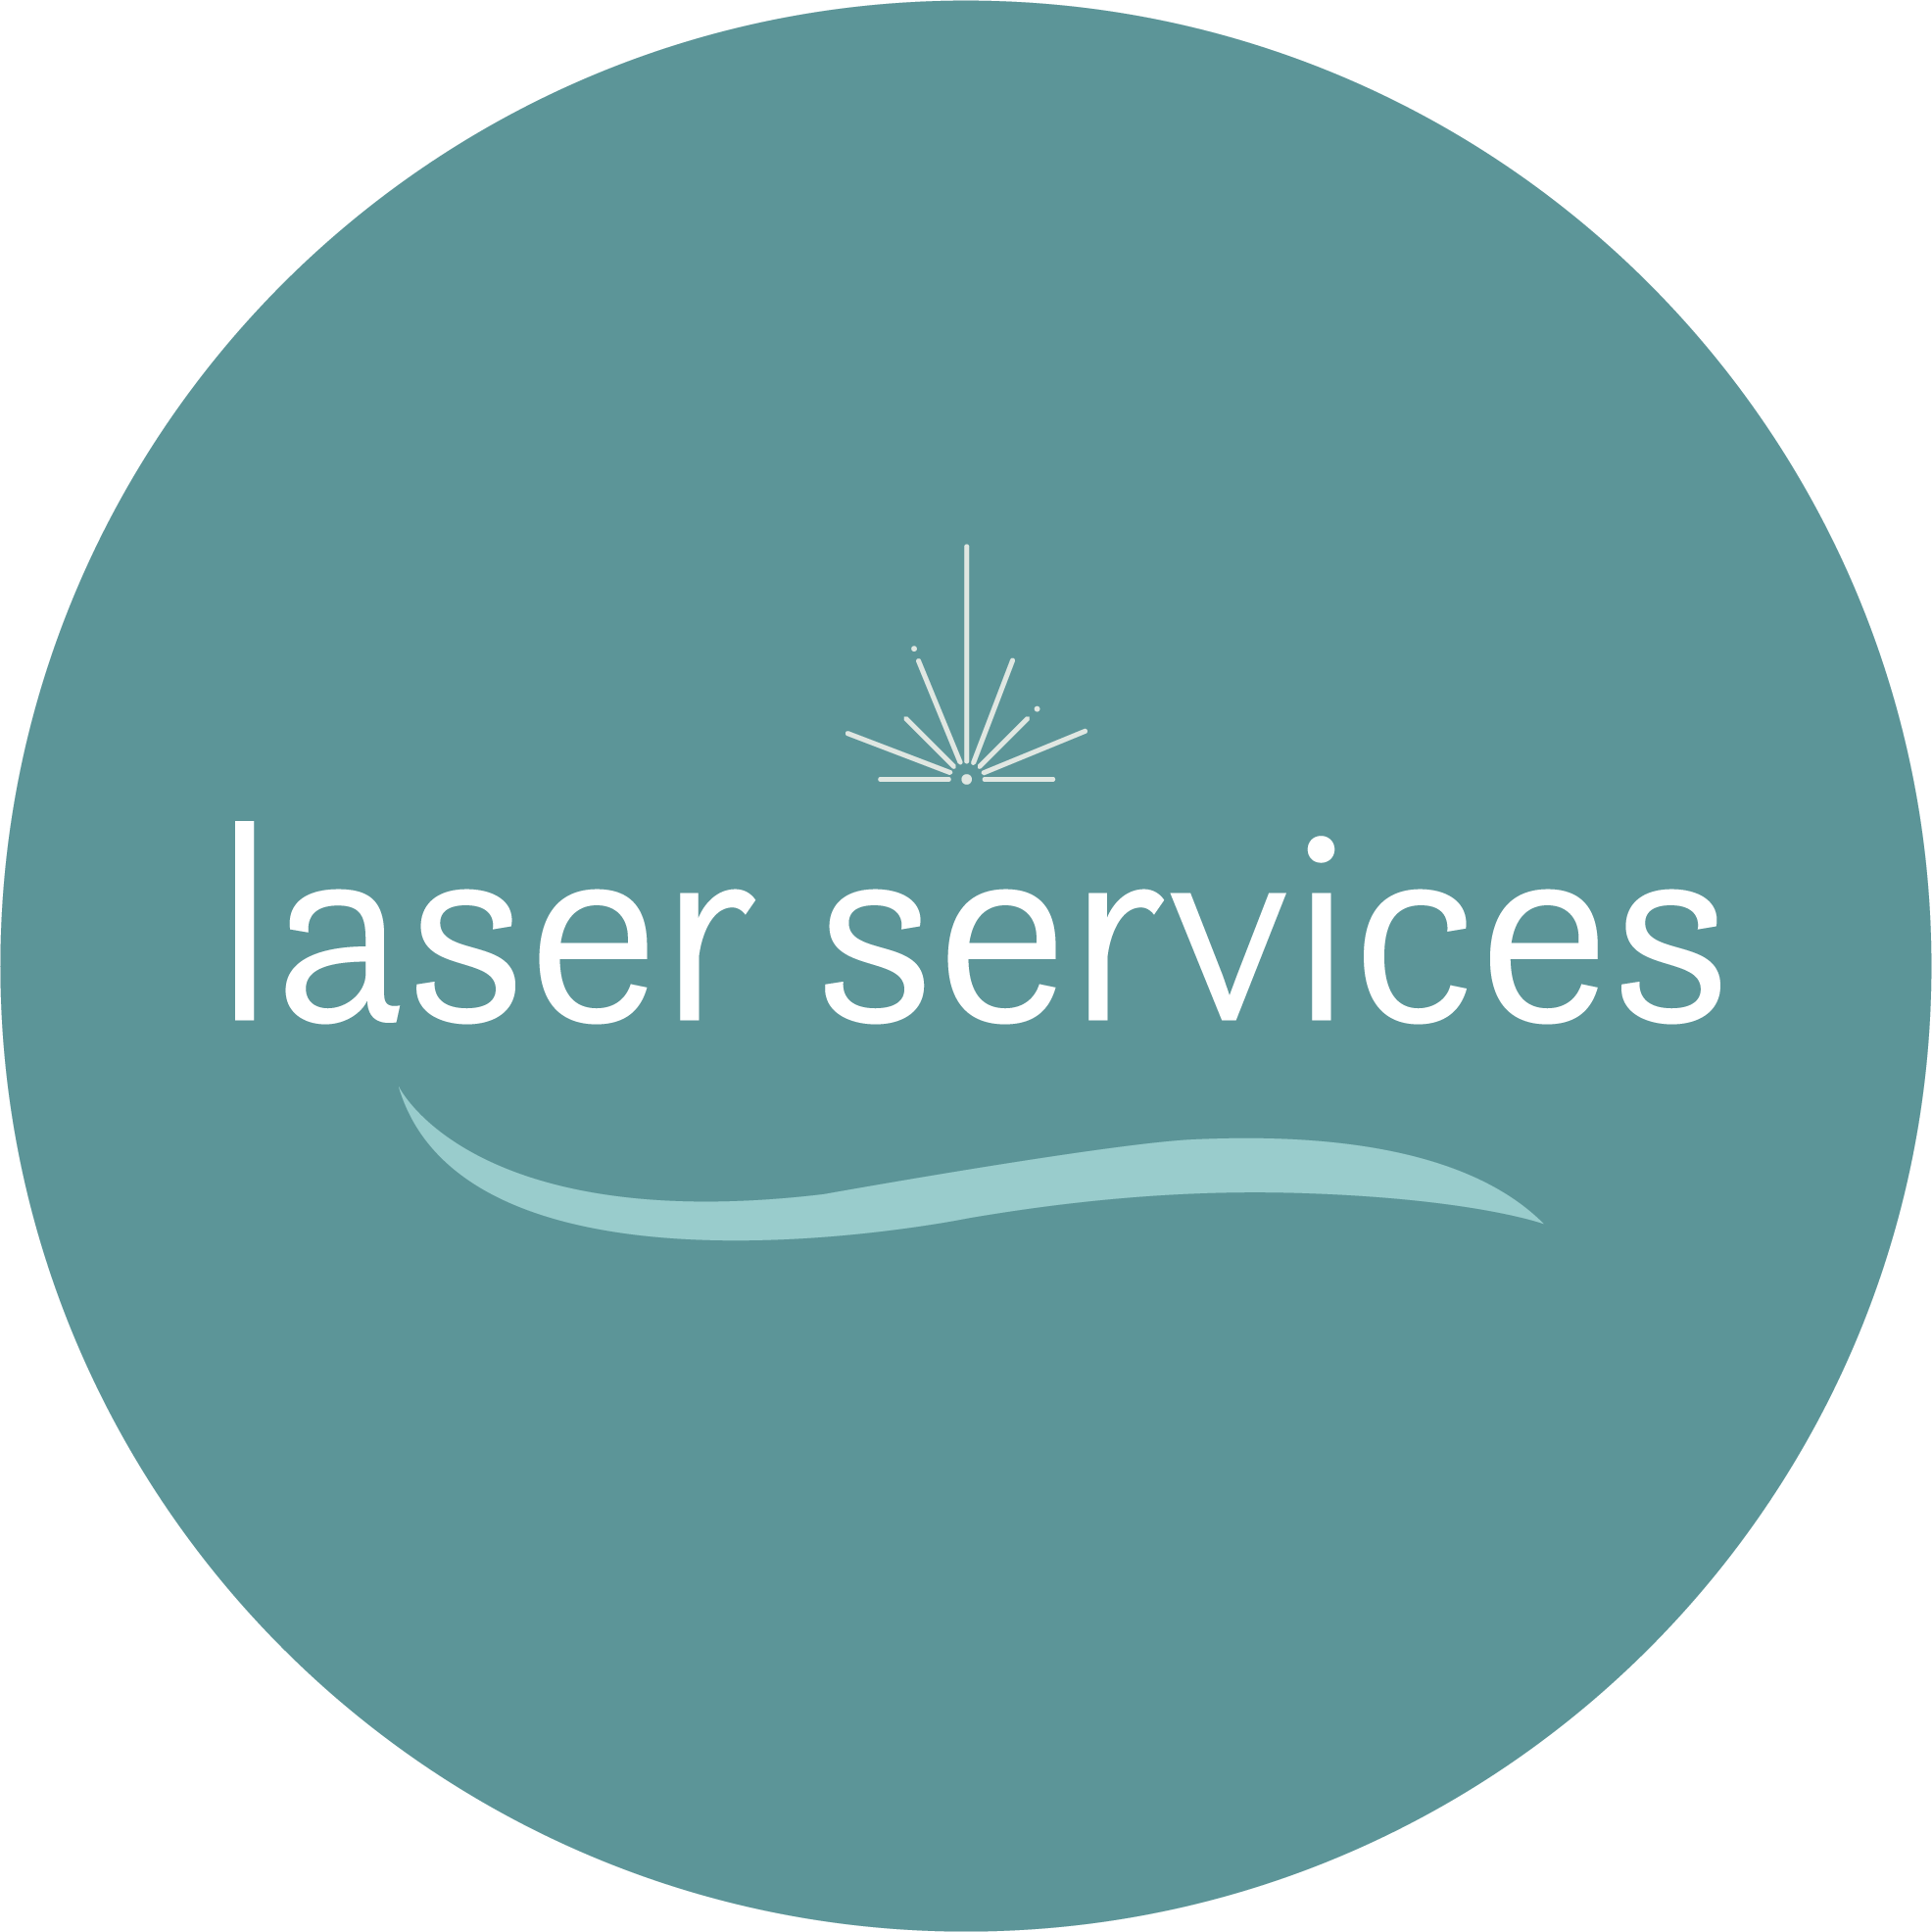 laser-services-circle.png